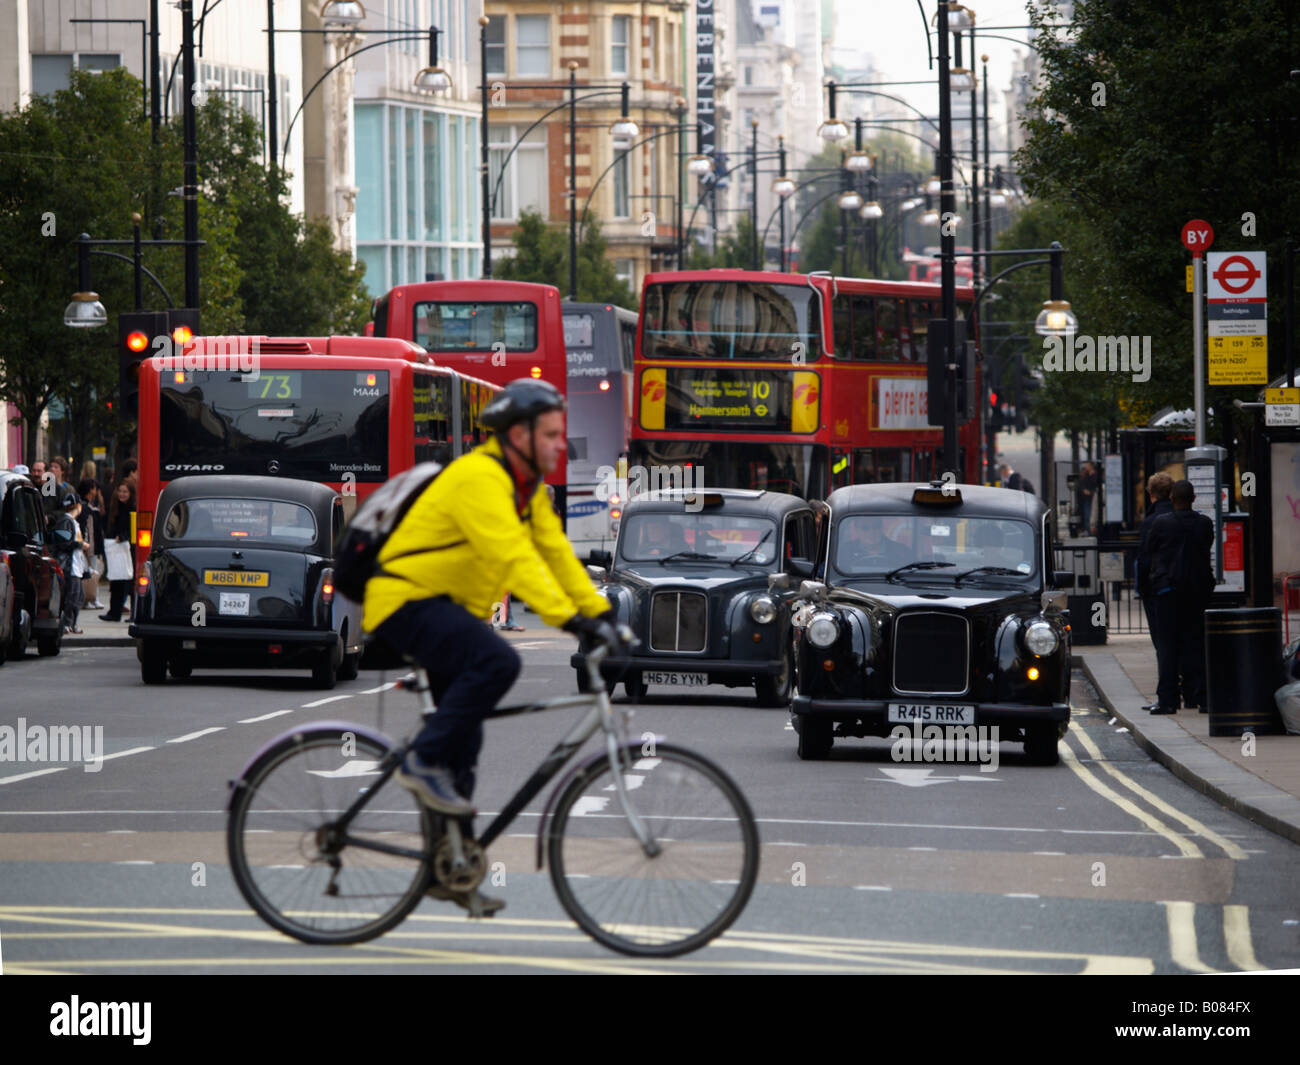 Bicyclist with yellow jacket and helmet crossing riding on Oxford Street London UK Stock Photo